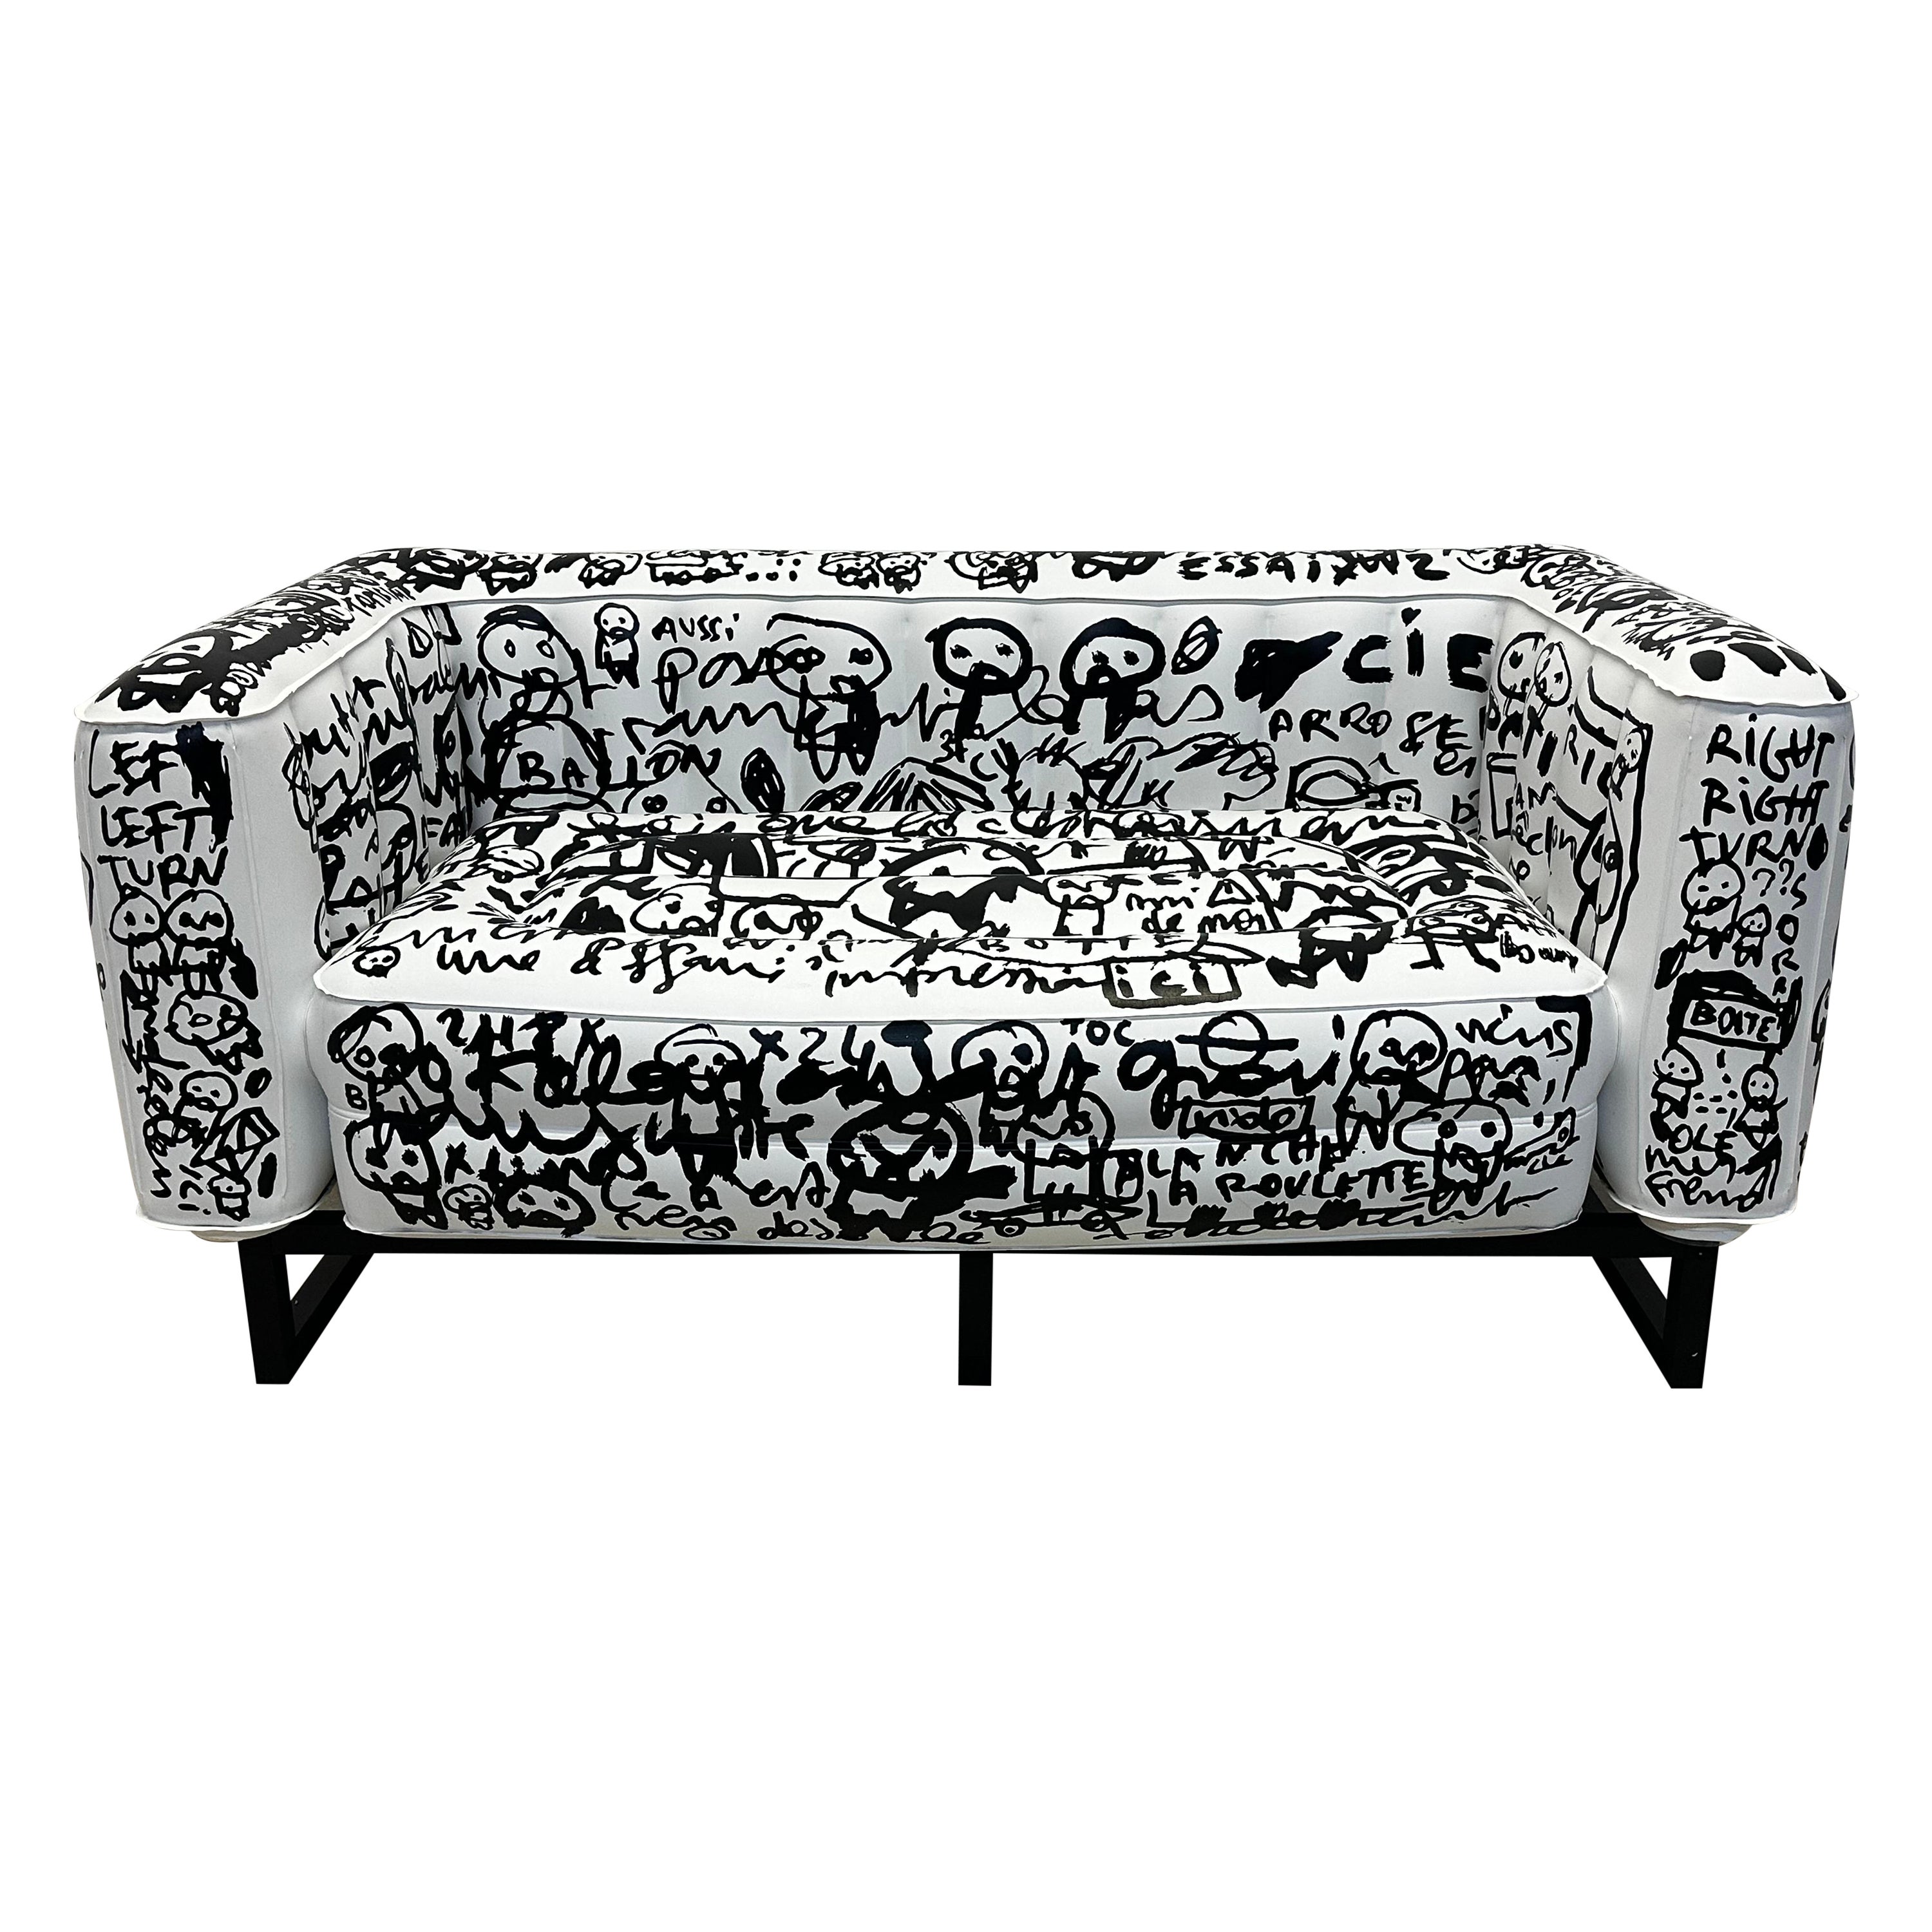 Yomi Nep Limited Edition Cocktail Ruka Sofa by Mojow Design - First Ed. 18/25 For Sale